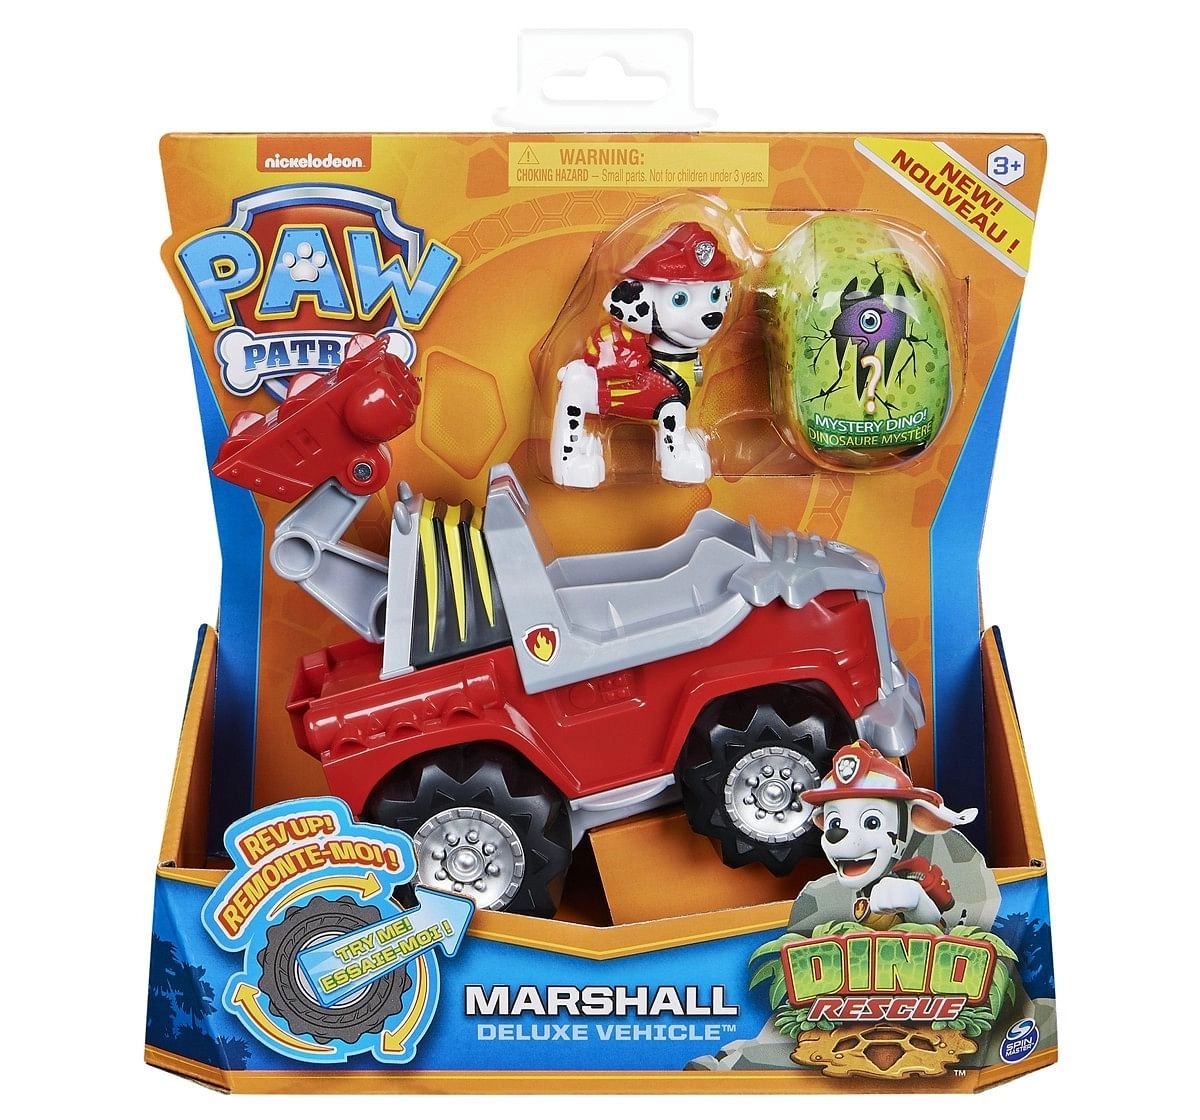 Paw Patrol Theme Vehicle Dino Marshall Chase Red 3Y+